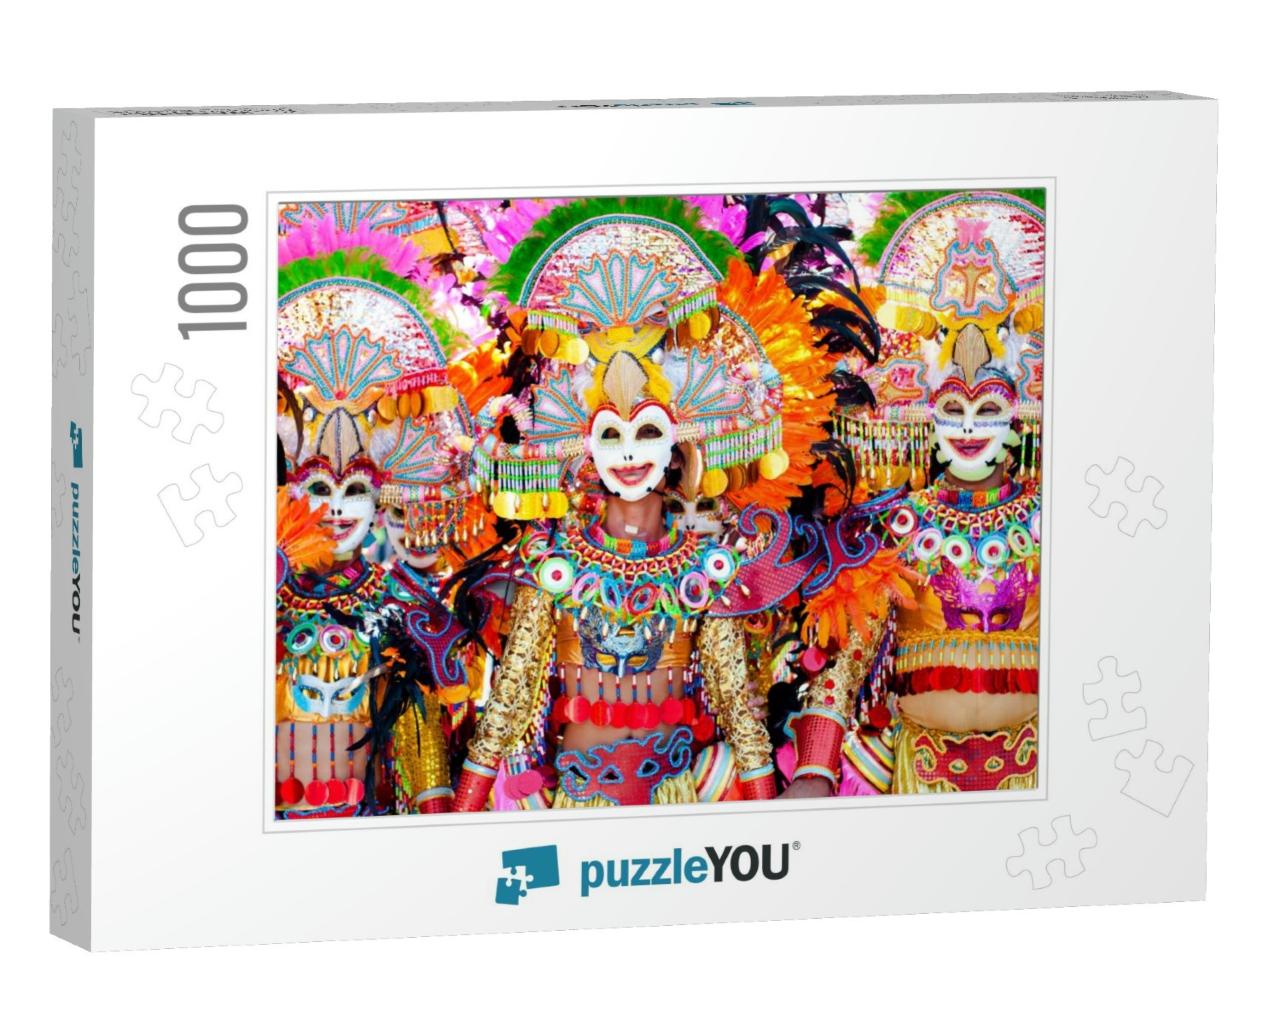 Parade of Colorful Smiling Mask At Masskara Festival, Bac... Jigsaw Puzzle with 1000 pieces